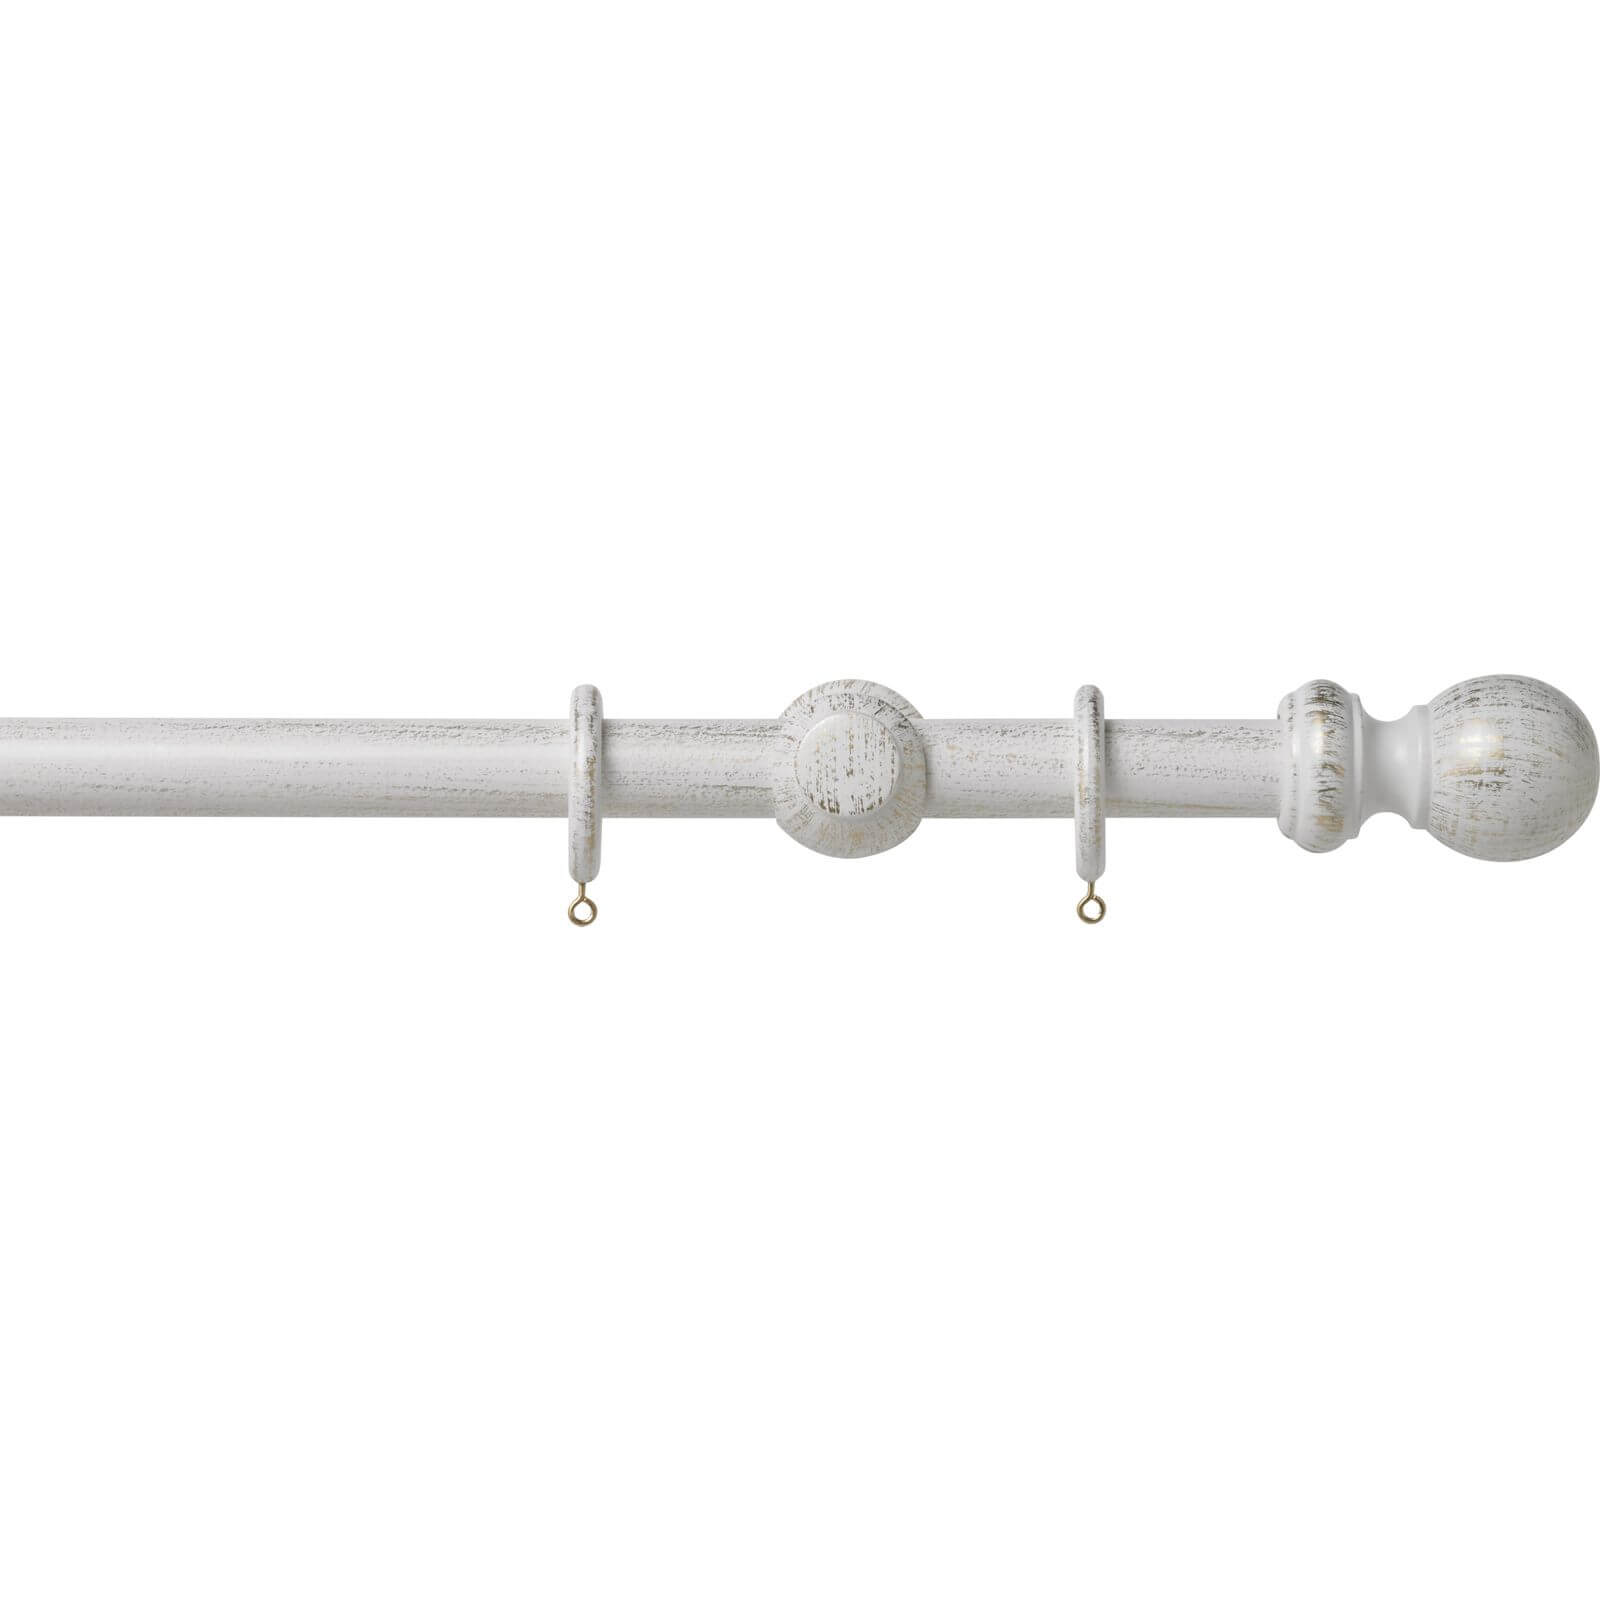 Photo of Scratched White Wood 28mm Curtain Pole With Ball Finials - 1.2m